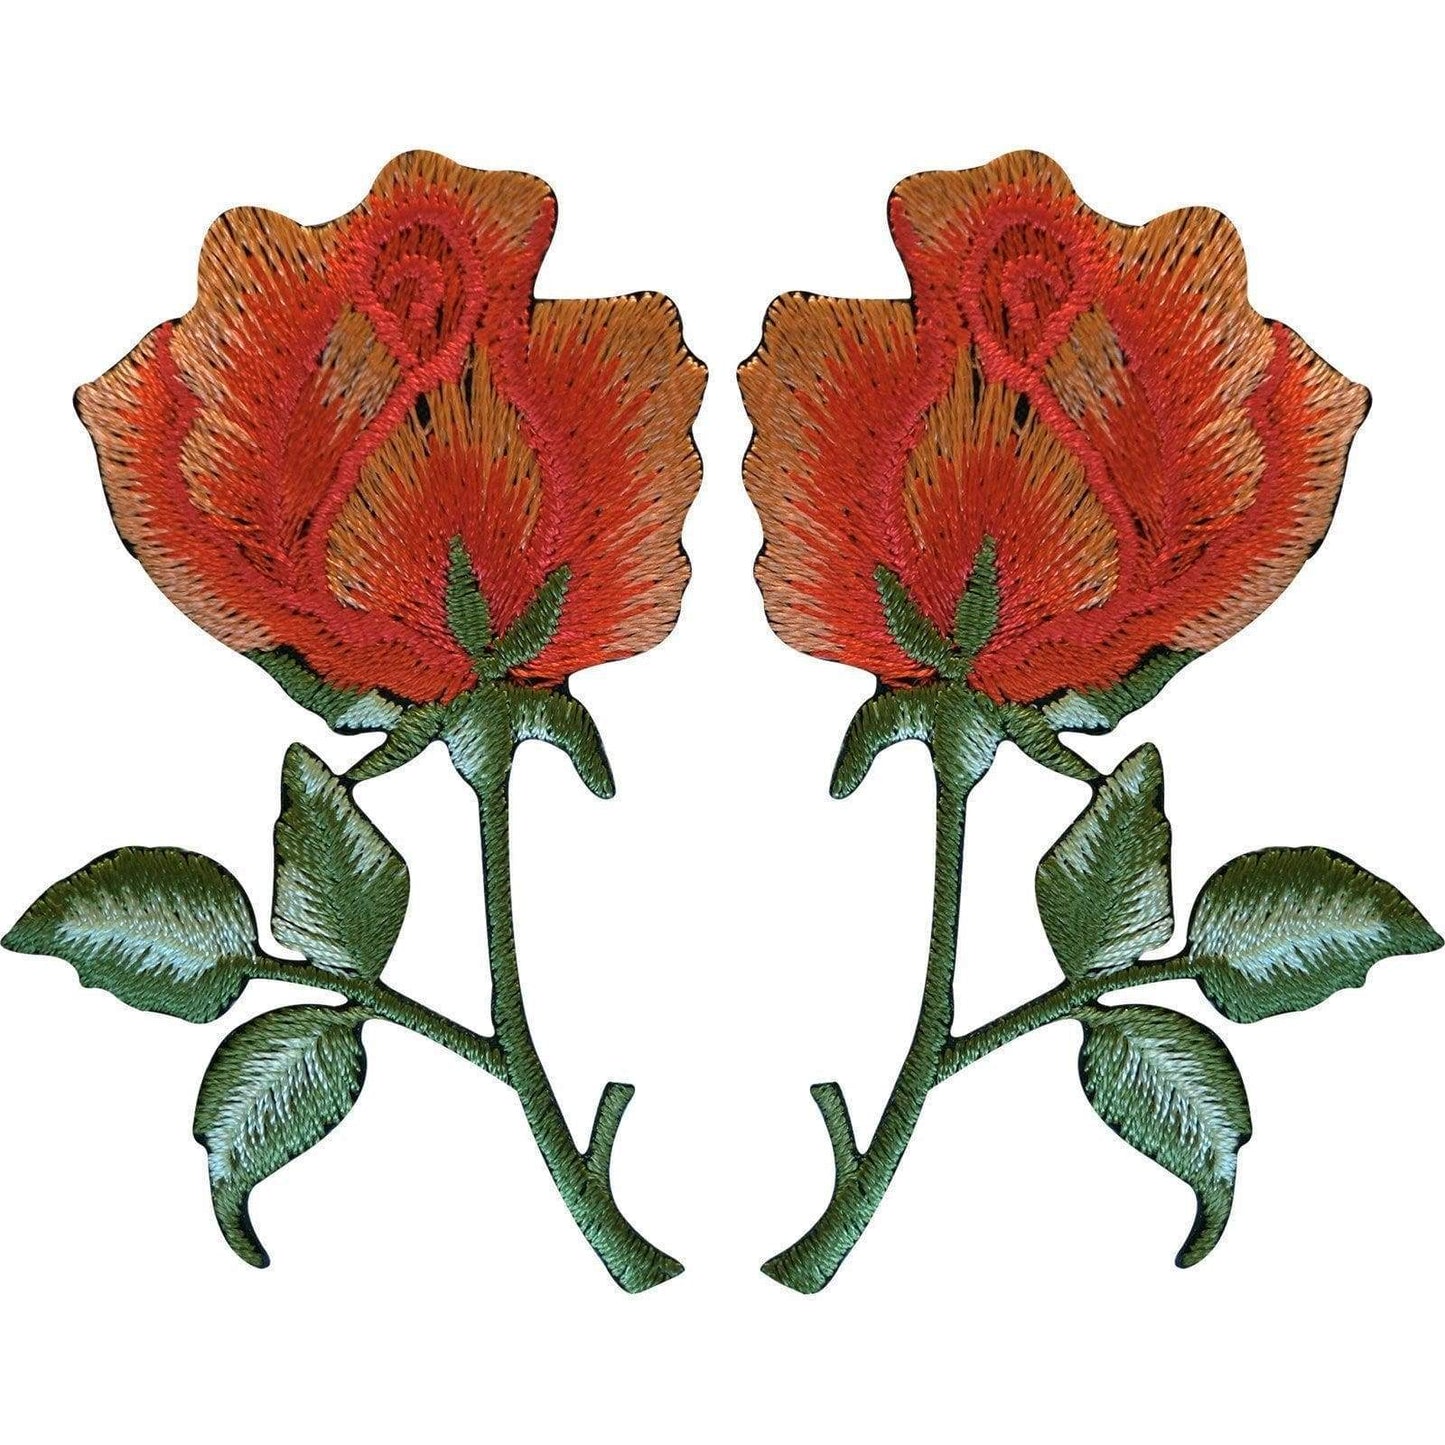 Pair of Peach Orange Roses Patches Iron On Sew On Embroidered Rose Flower Patch